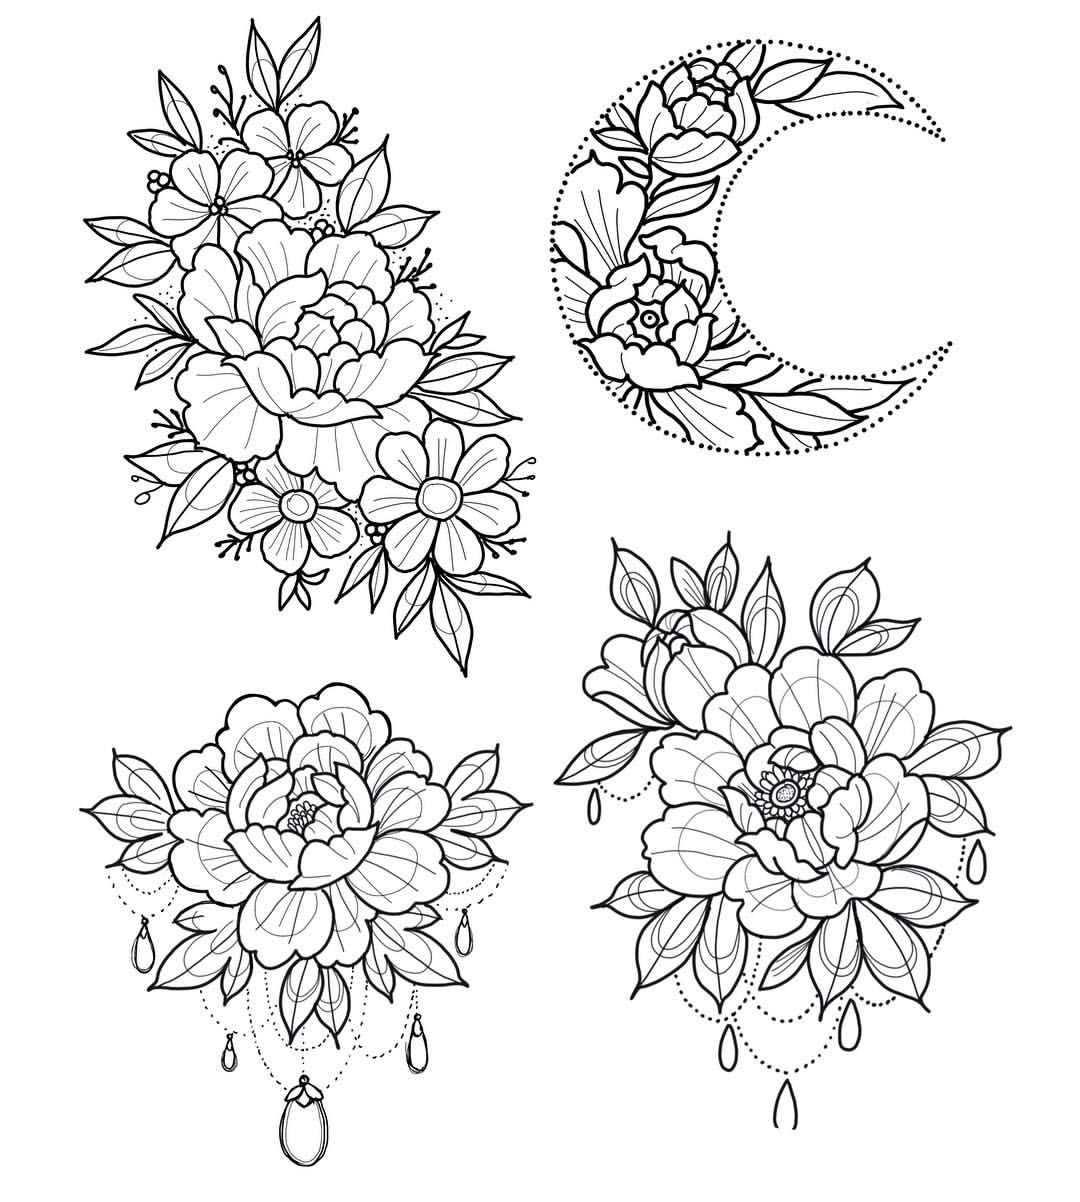 Double Cancellation Saturday 11th August 1 3 3 5pm These Designs Available Please Email If Interested Tattoos Inspirational Tattoos Floral Tattoo